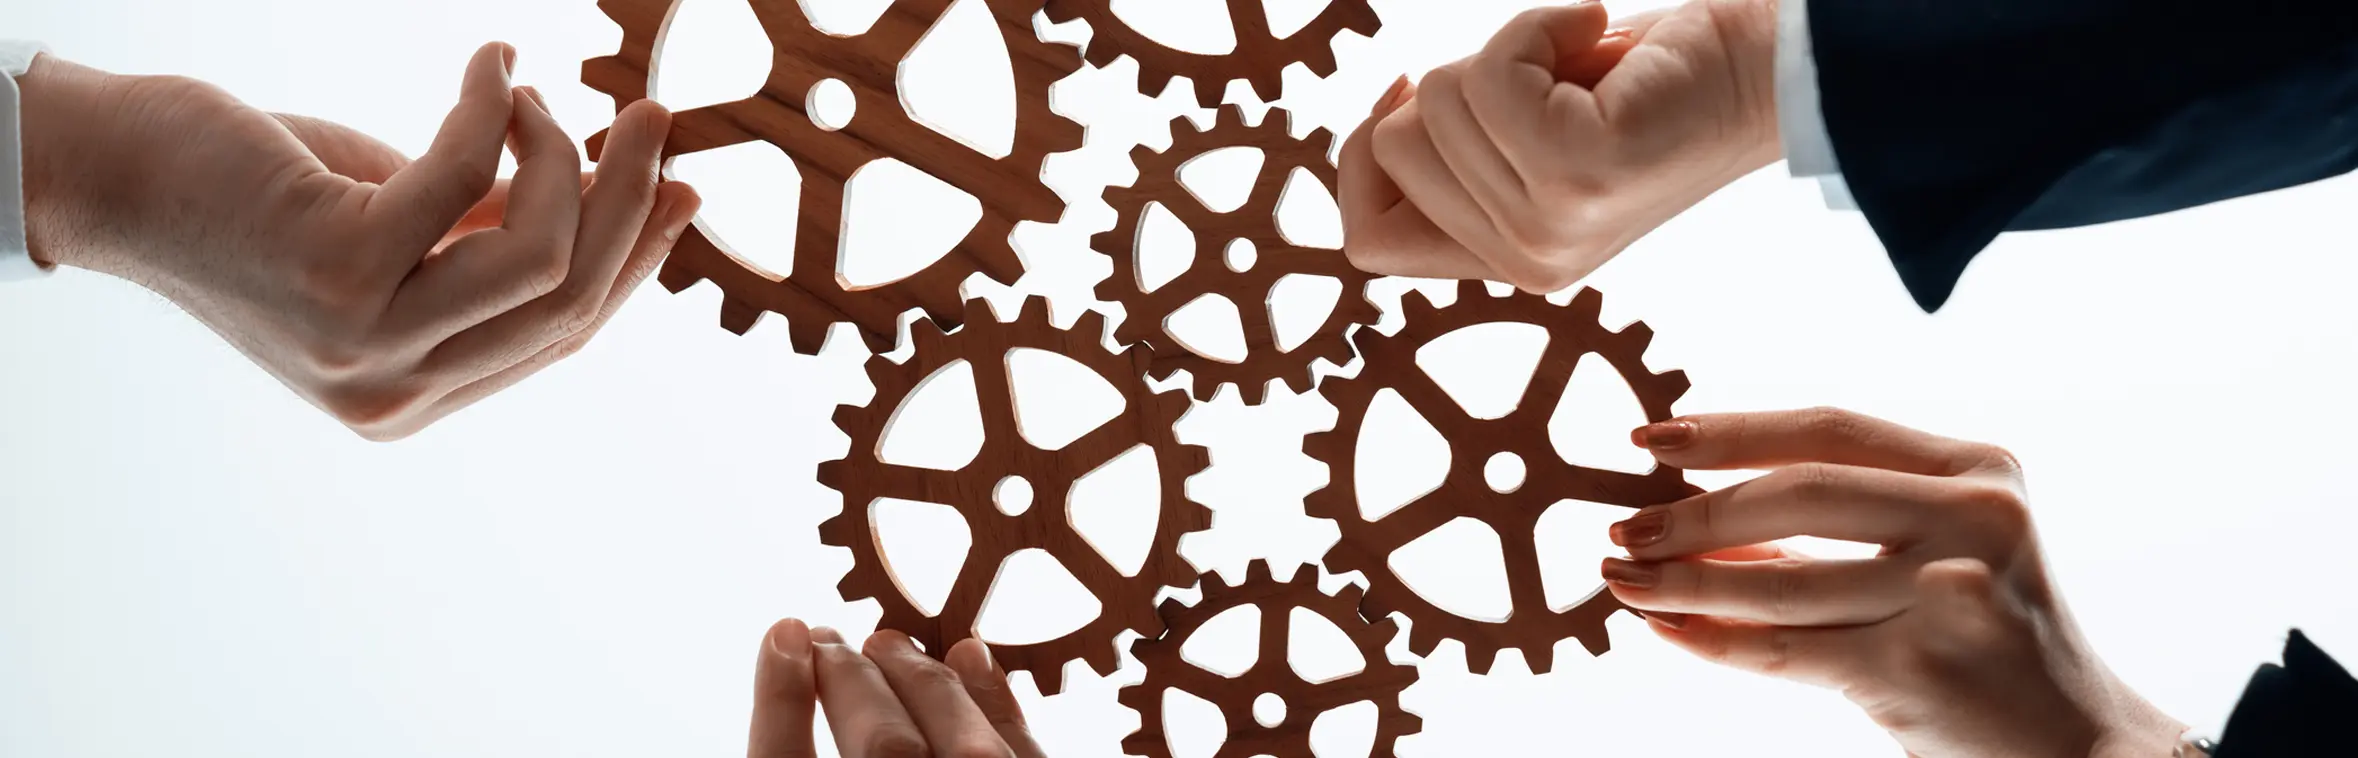 Hands holding cogs, linking them together